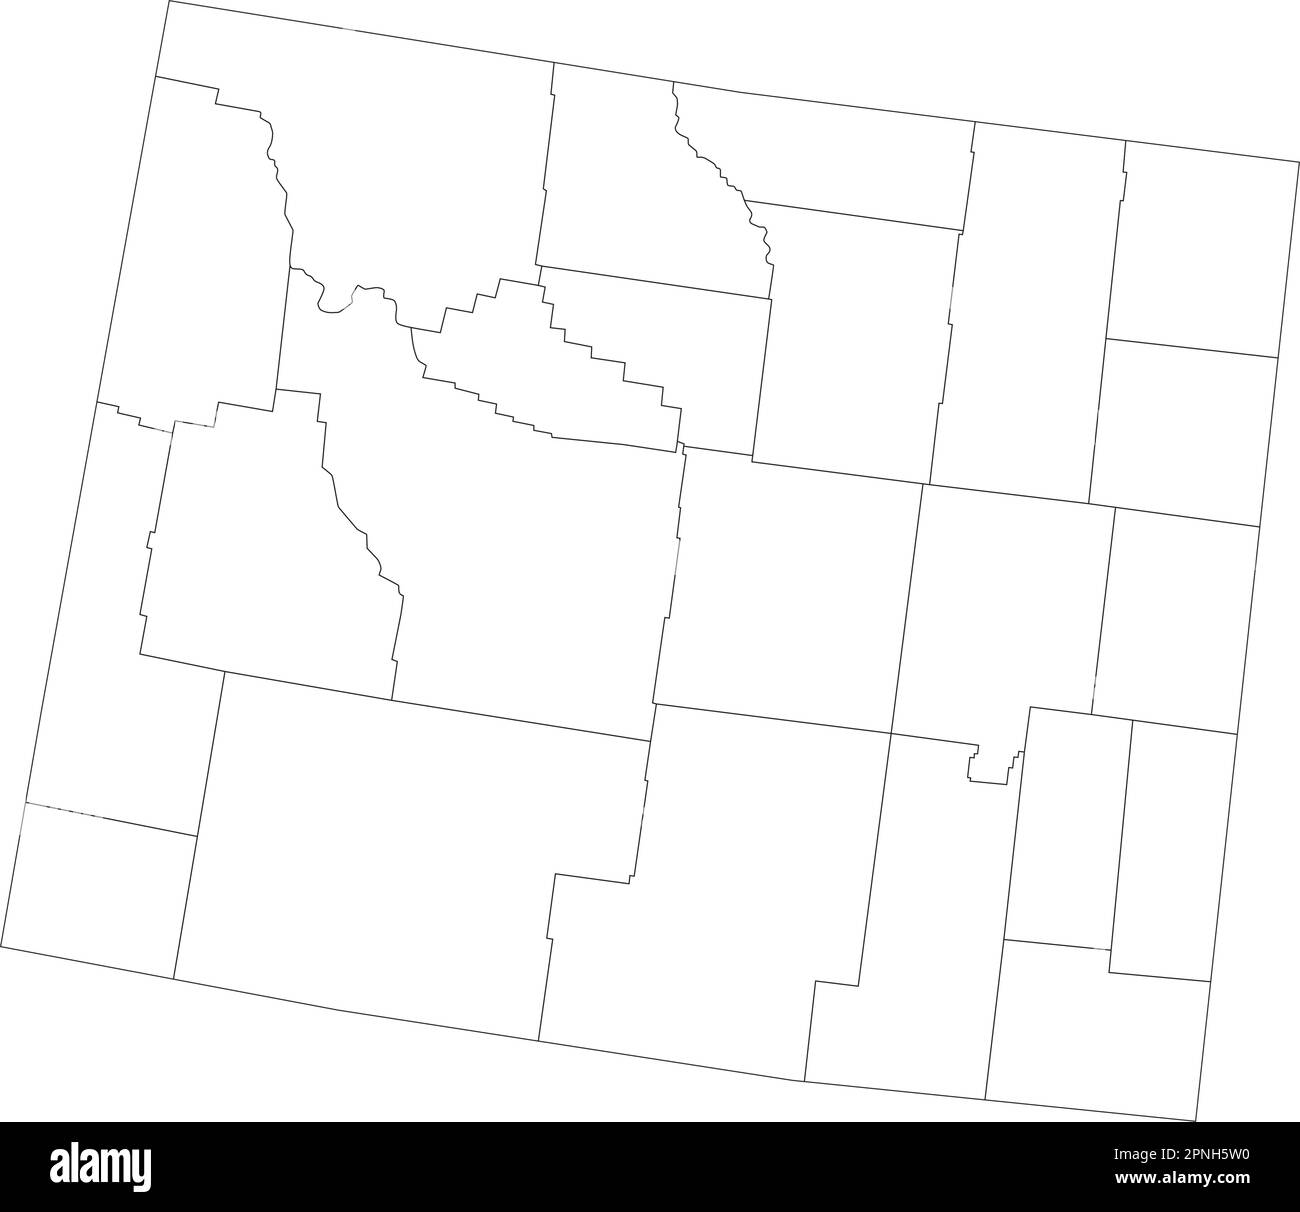 Highly Detailed Wyoming Blind Map. Stock Vector